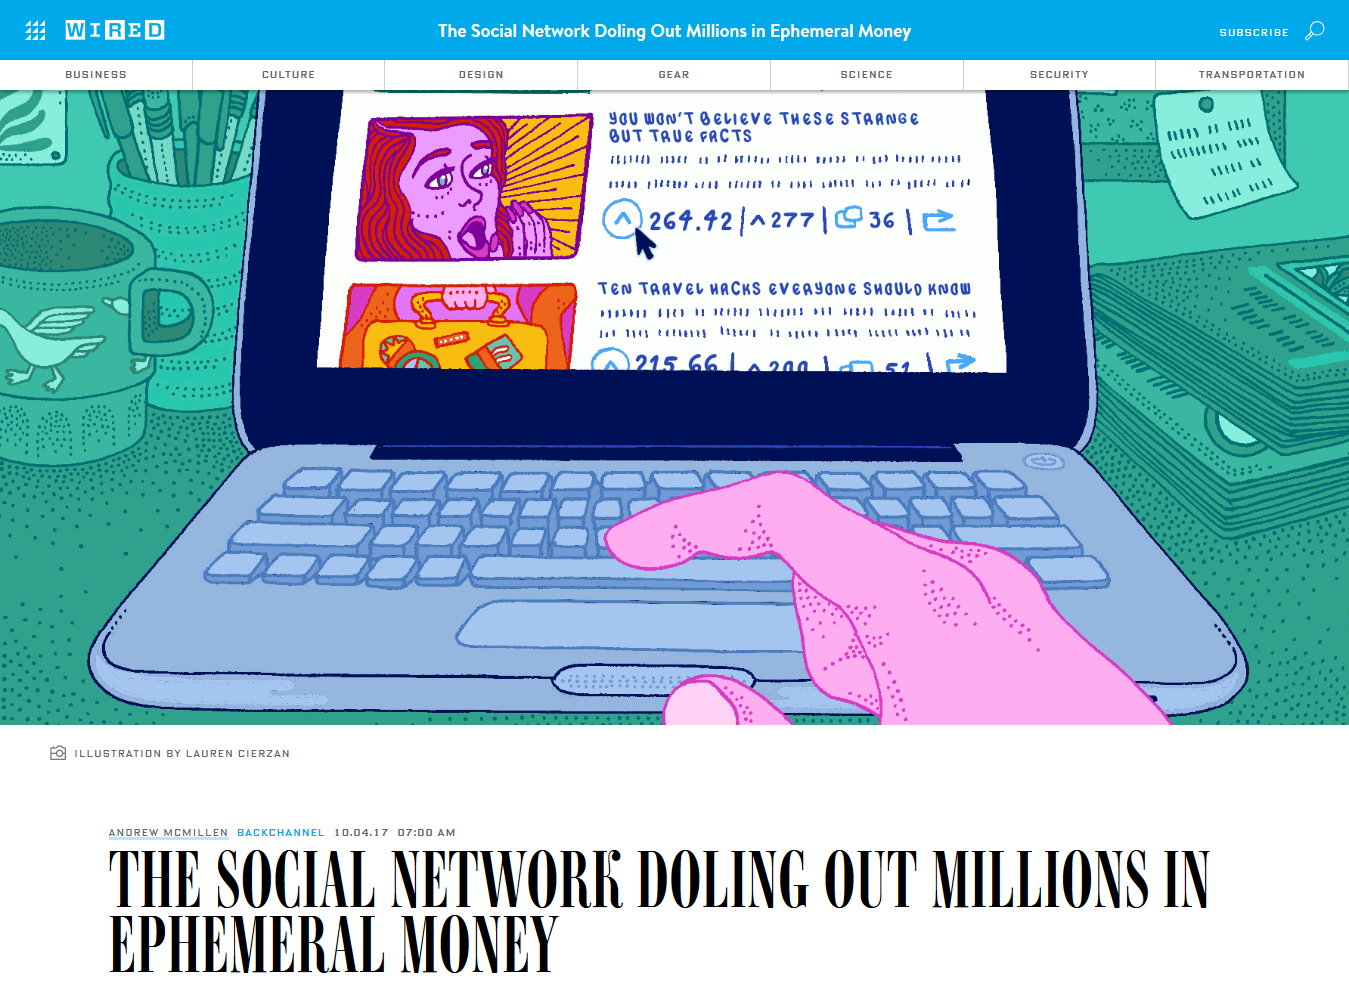 Screenshot-2017-10-5 The Social Network Doling Out Millions in Ephemeral Money Backchannel.png